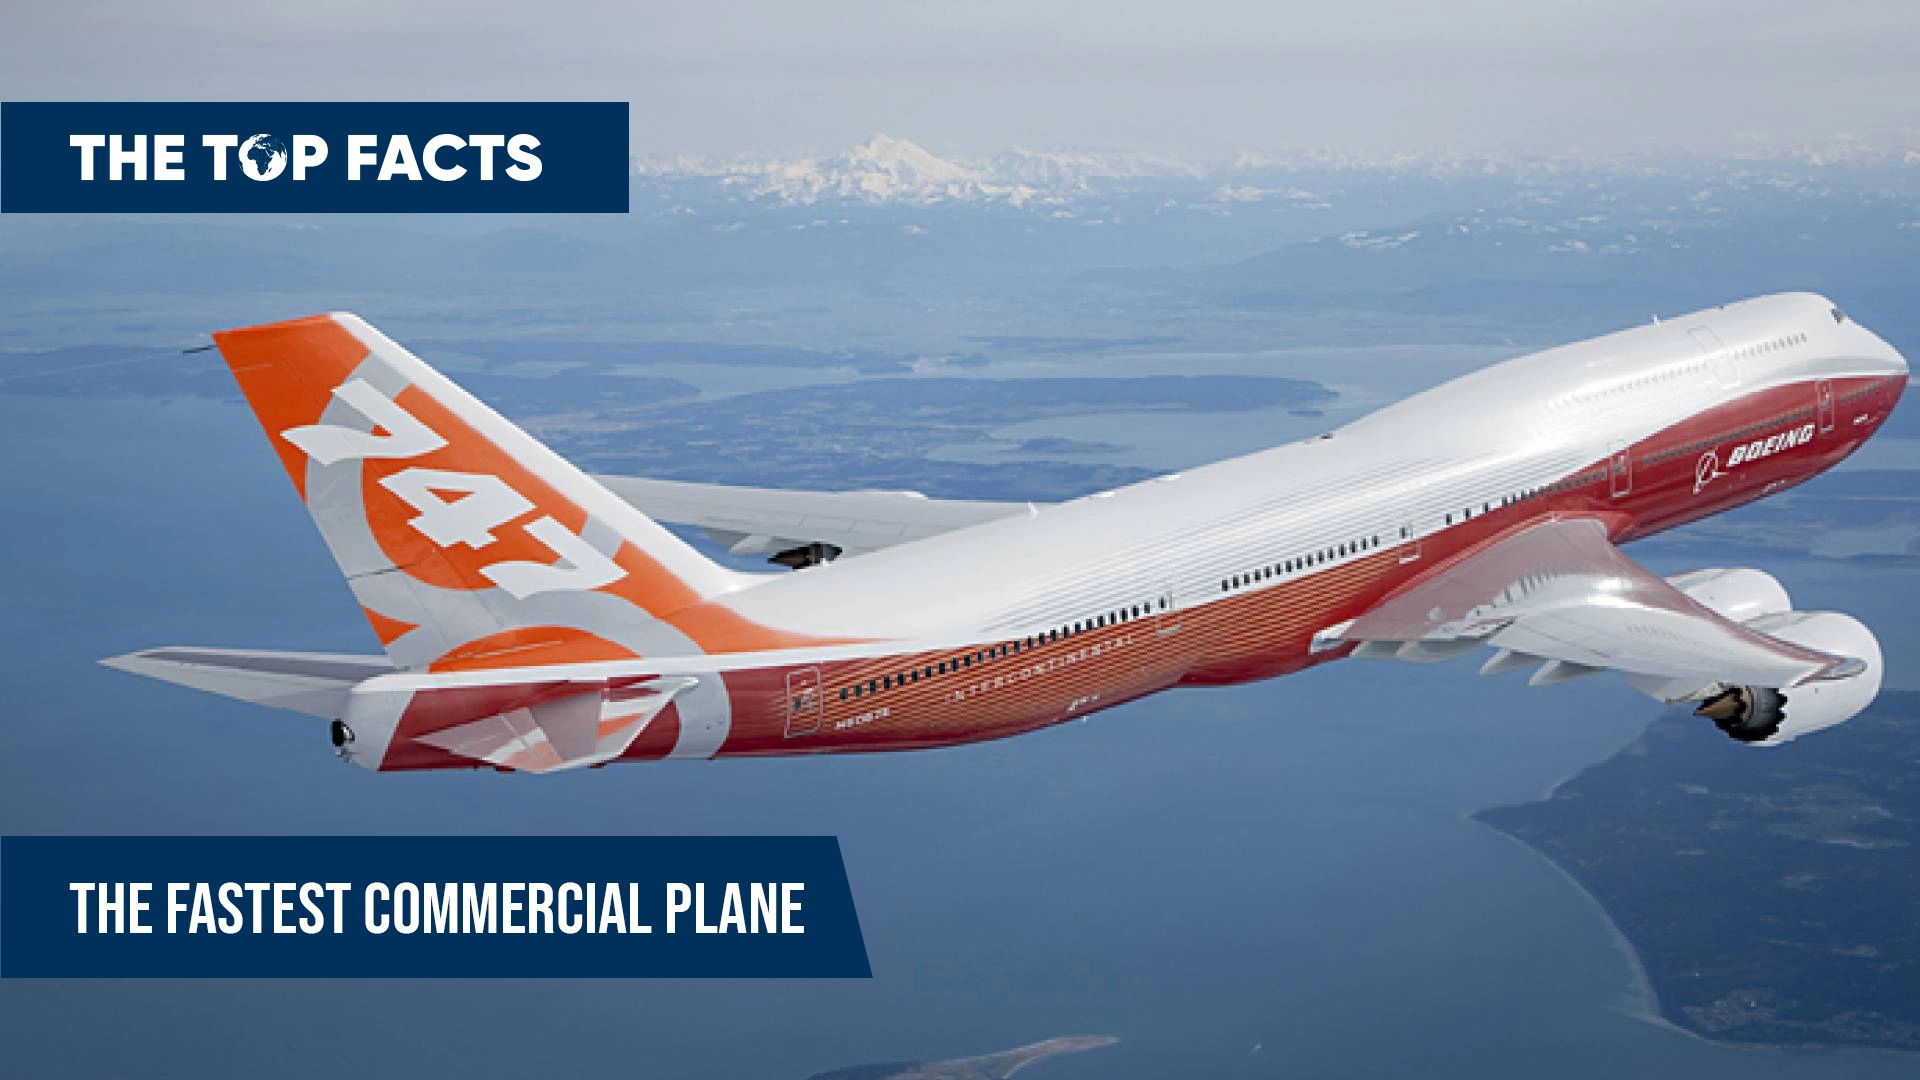 The fastest commercial airplane in service.